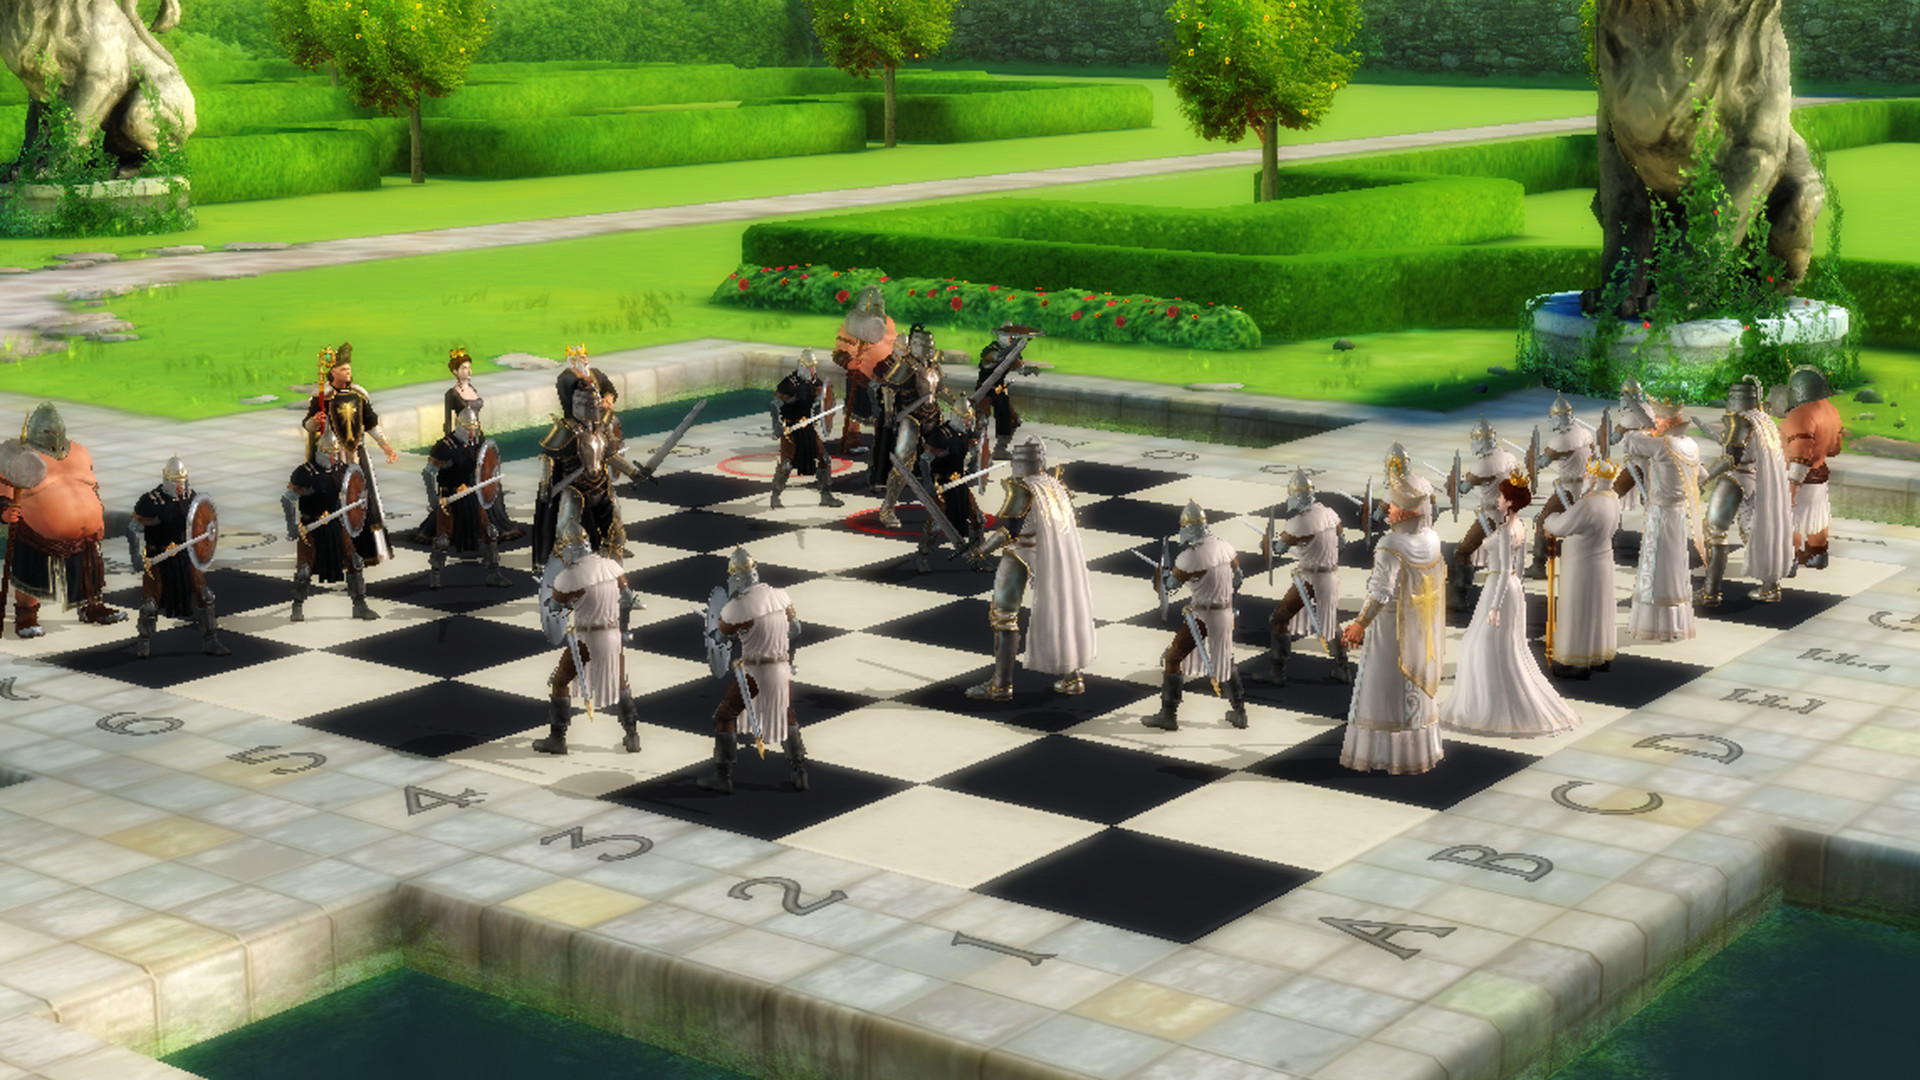 battle chess game of kings free download full version